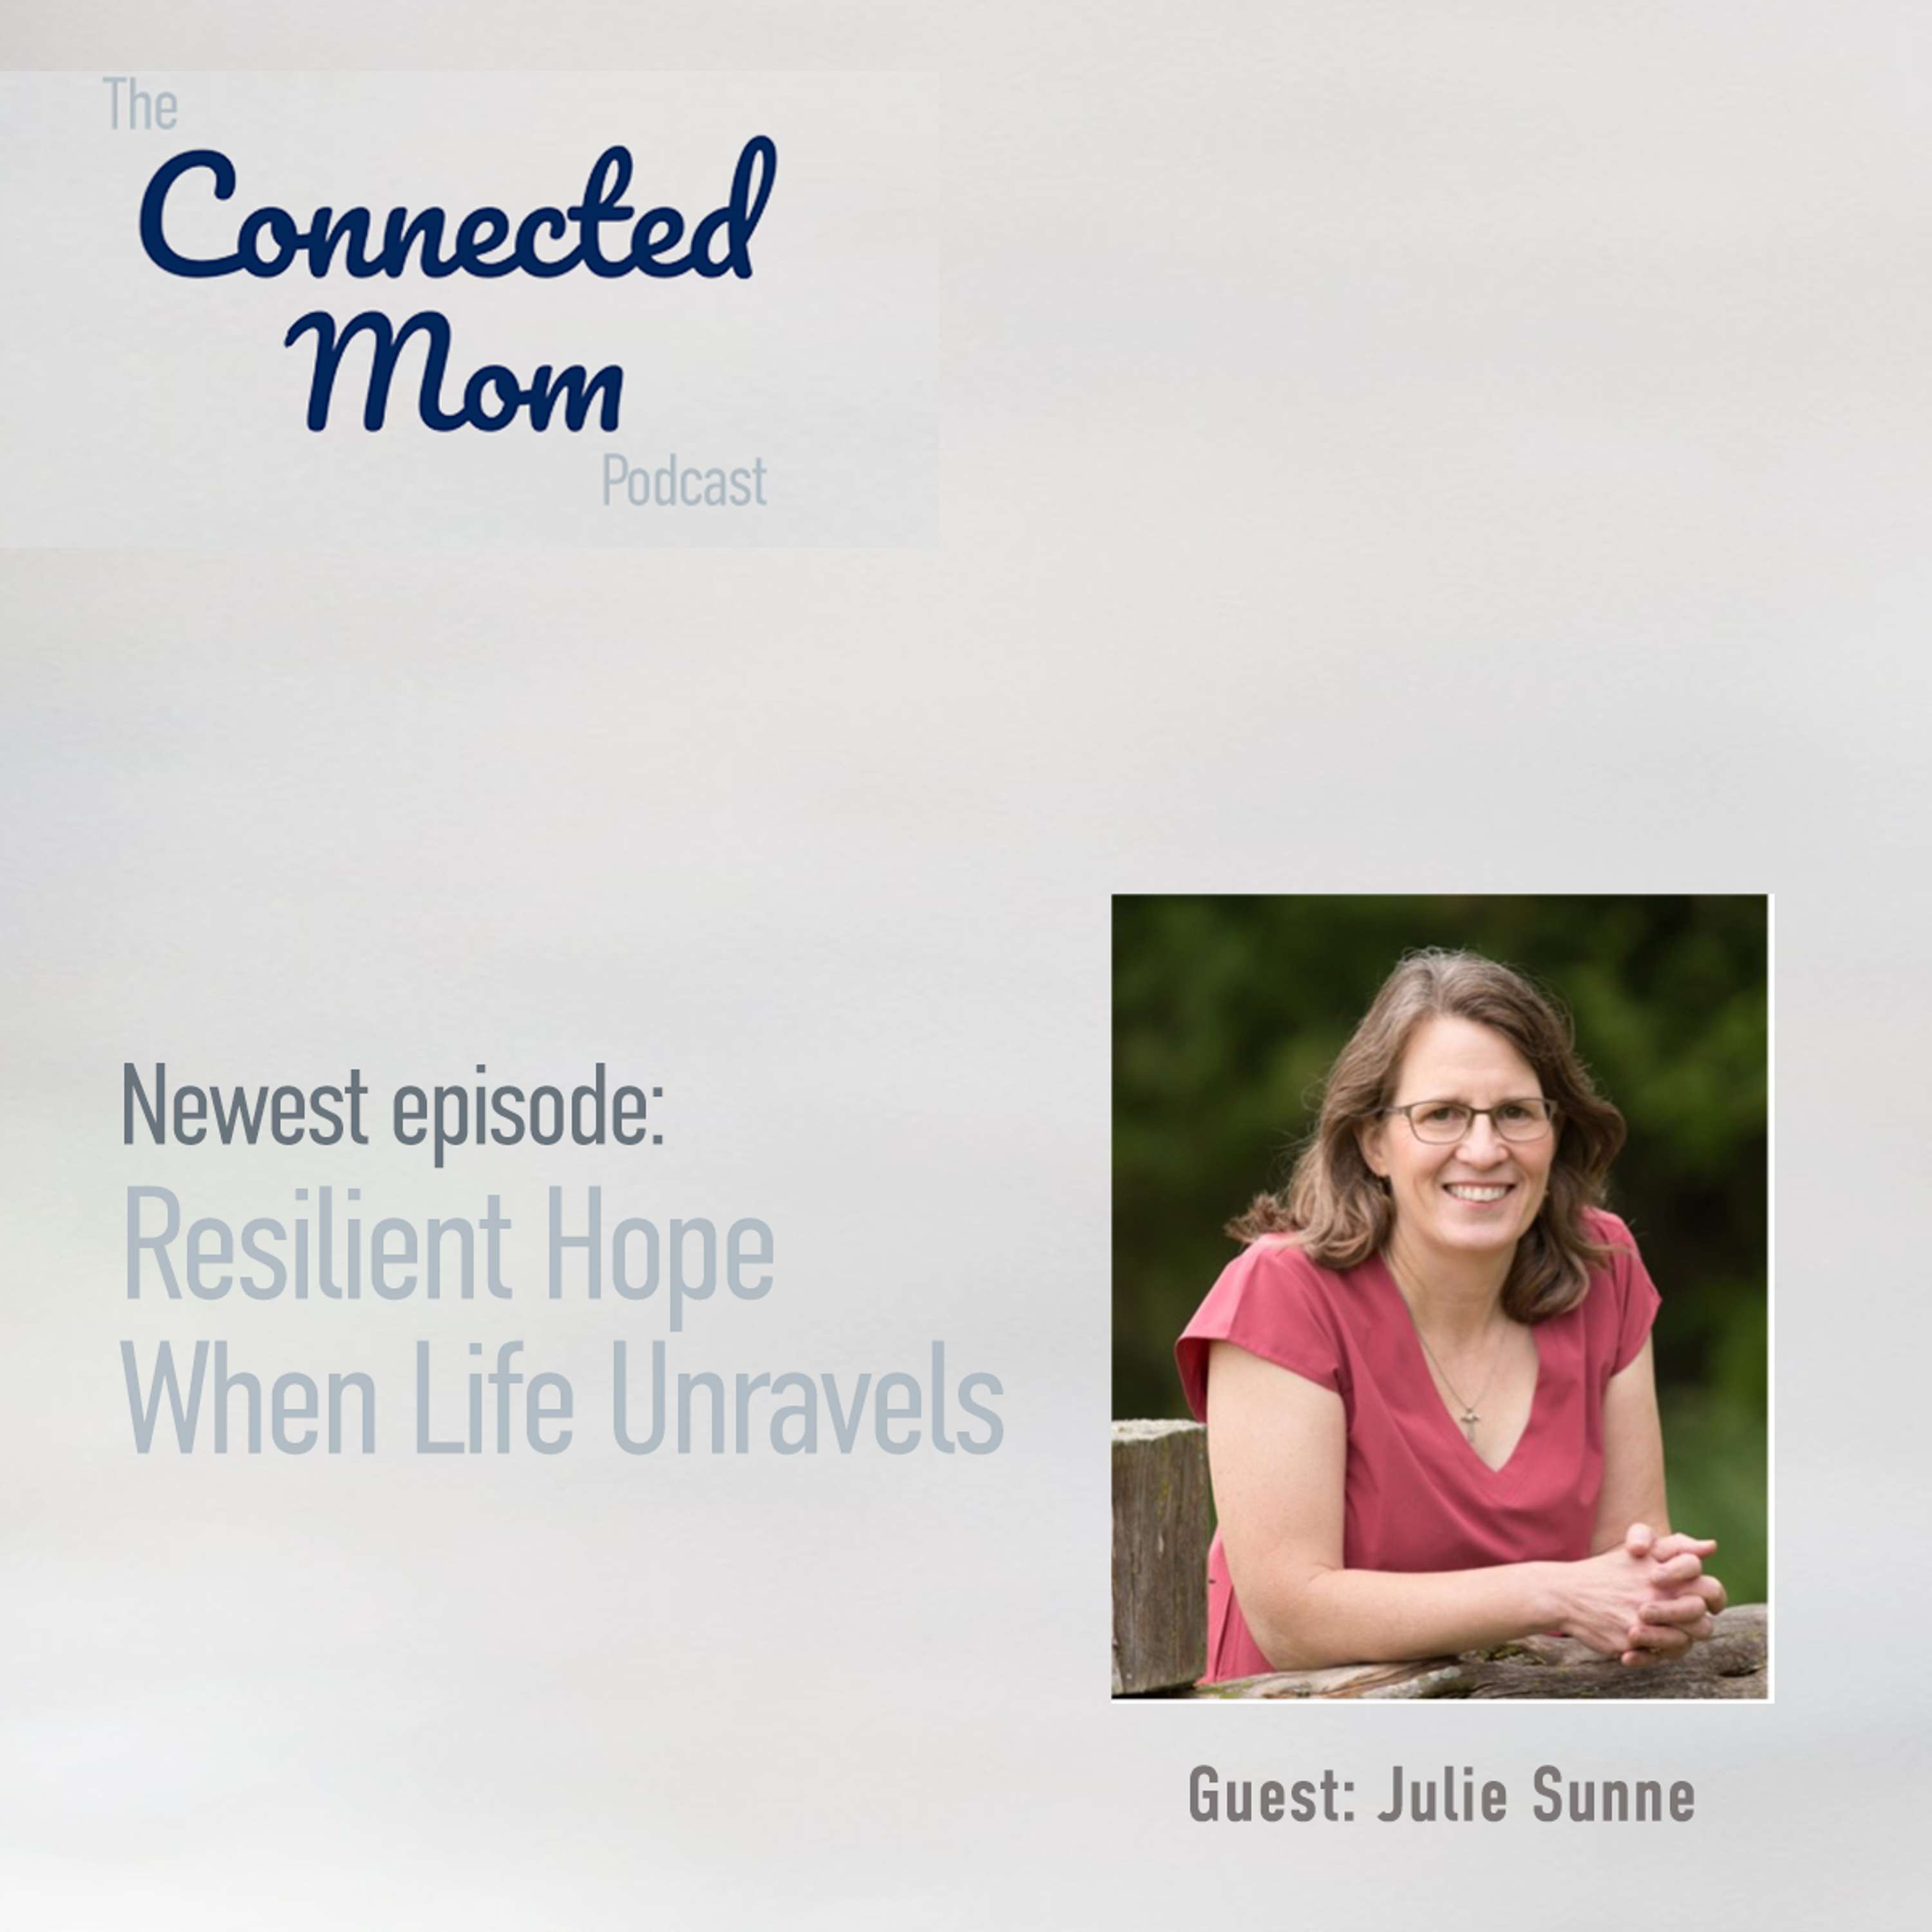 Resilient Hope When Life Unravels